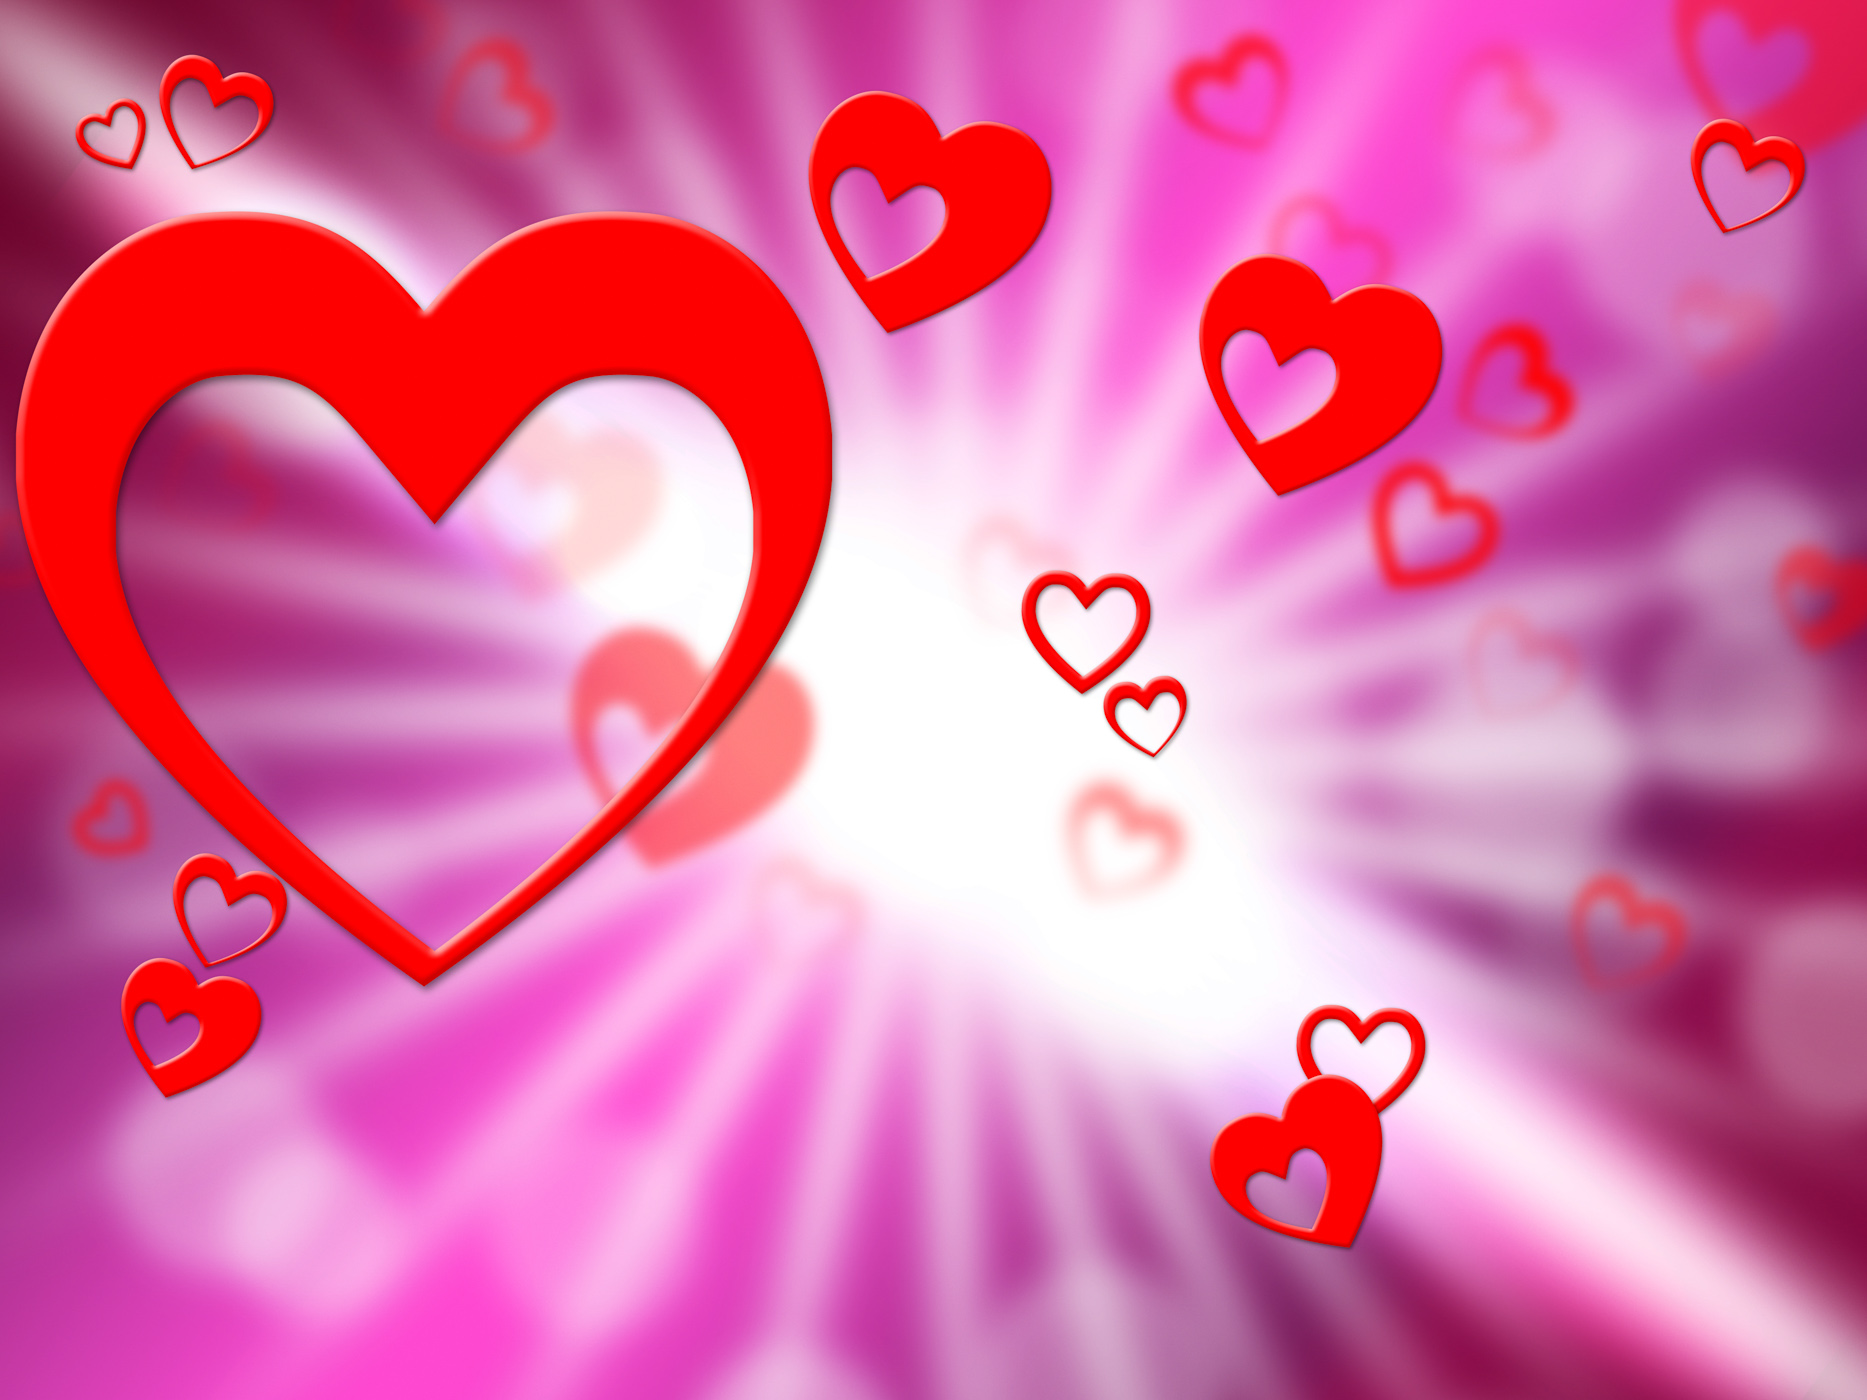 Hearts background indicates valentines day and affection photo